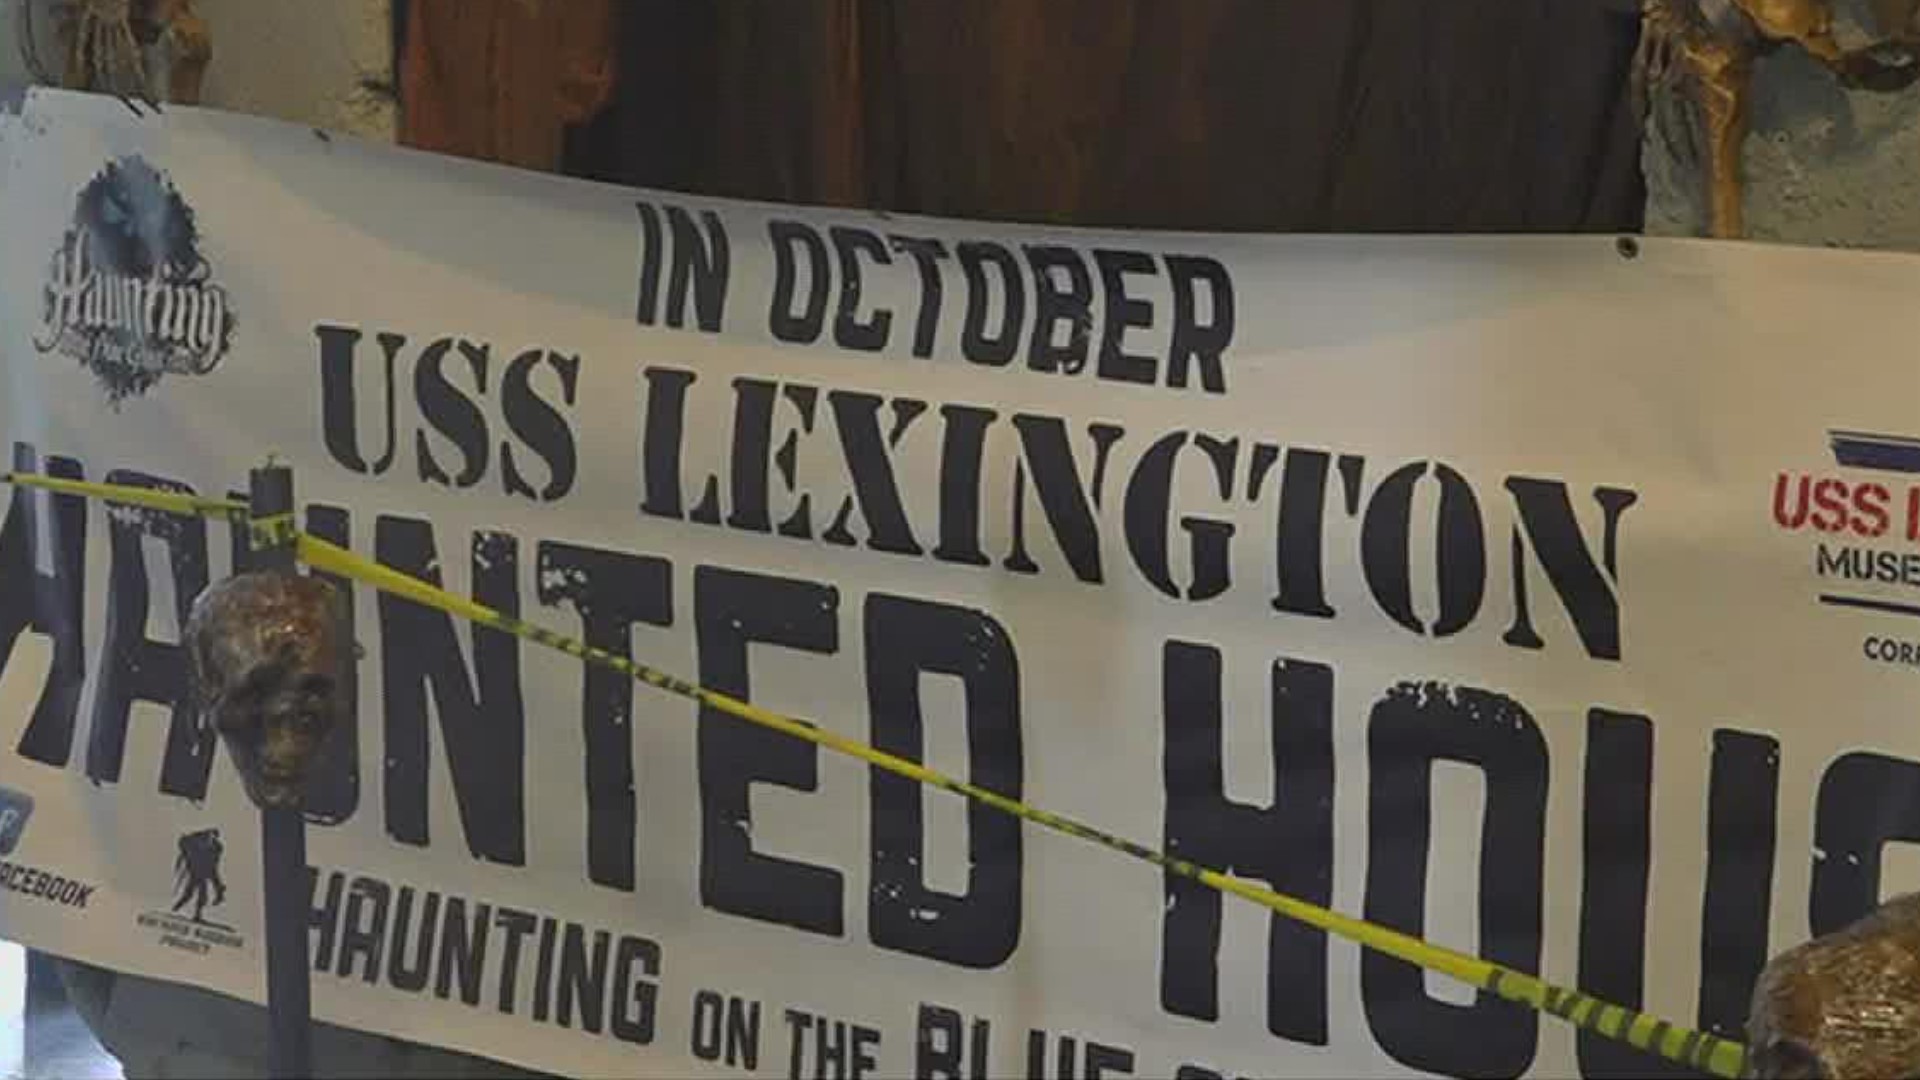 USS Lexington Museum's "Haunting on the Blue Ghost" haunted house opens Friday night.